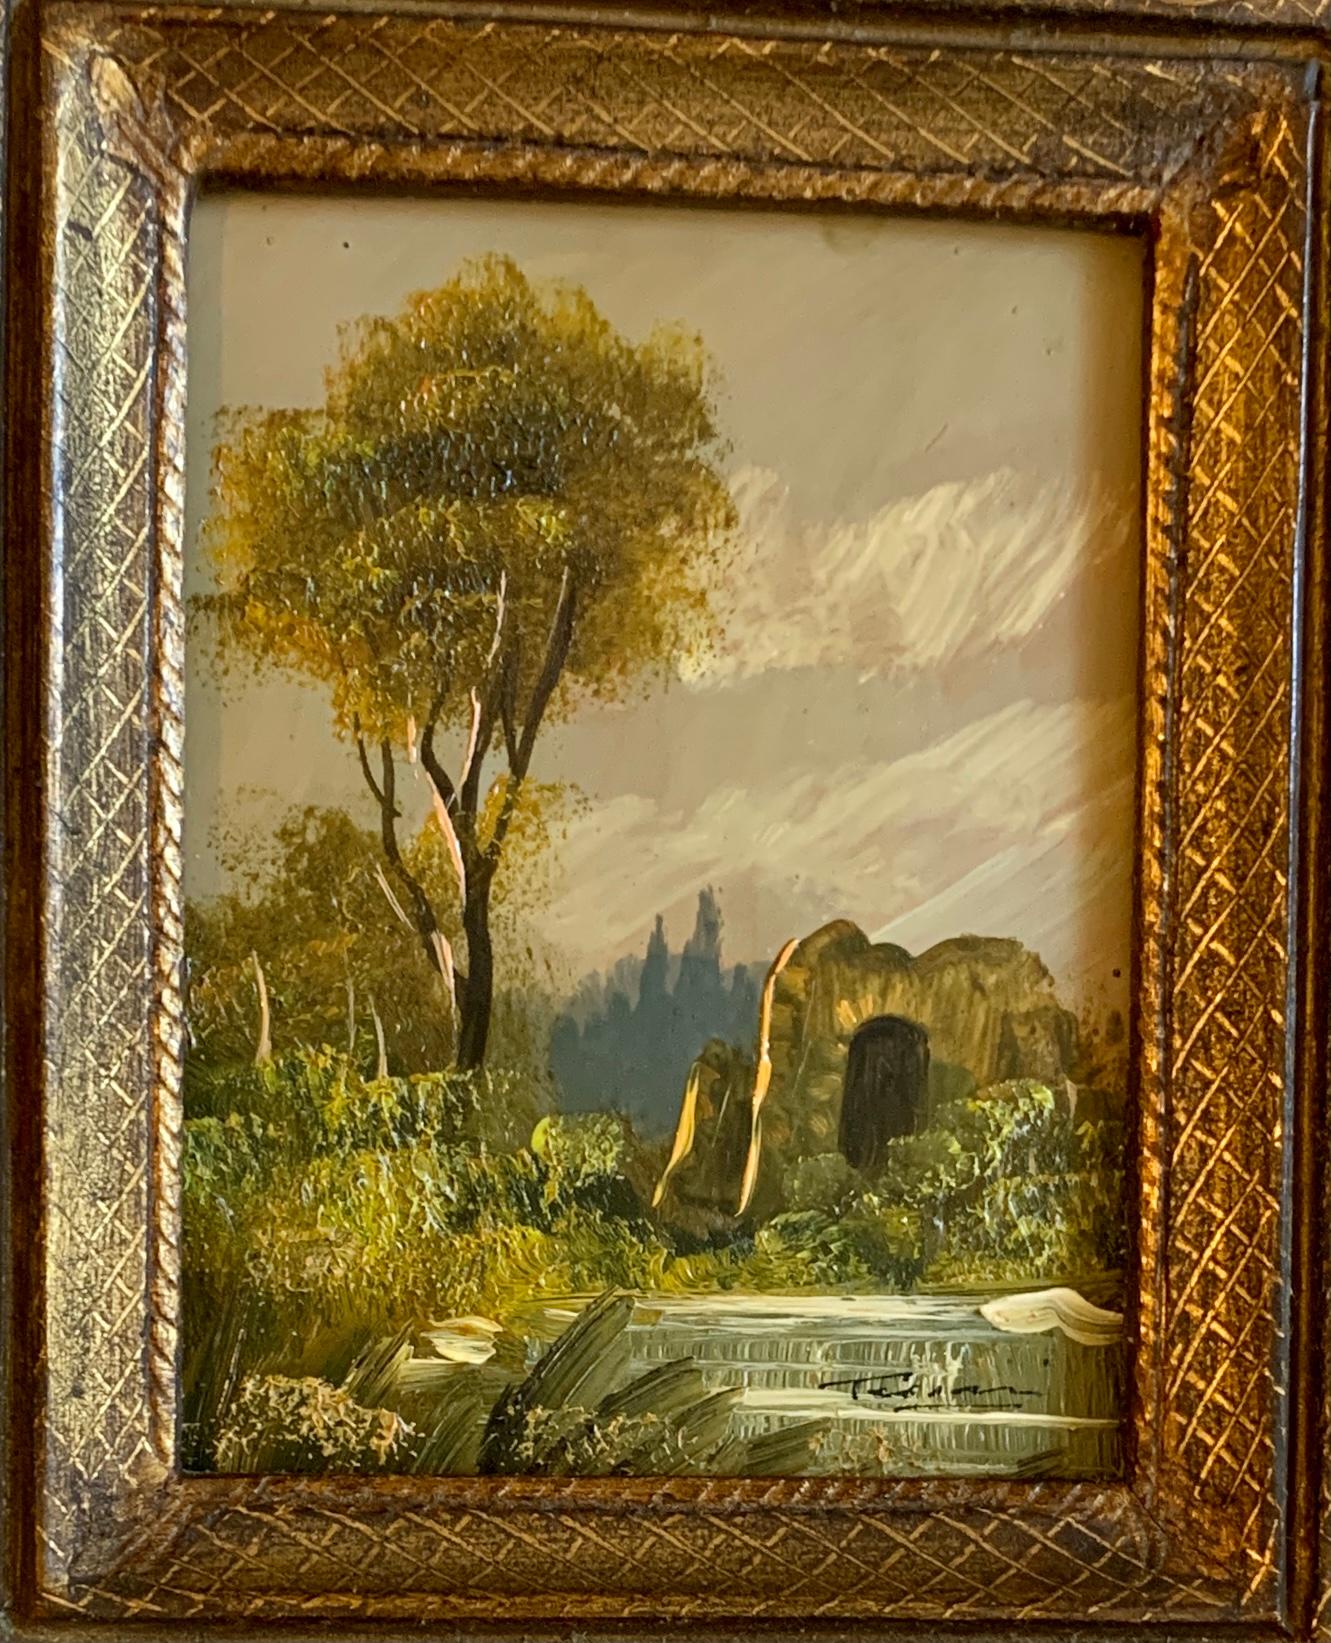  Five mid 20th century Italian oil landscapes with figures, castles, Churchs - Old Masters Painting by Unknown